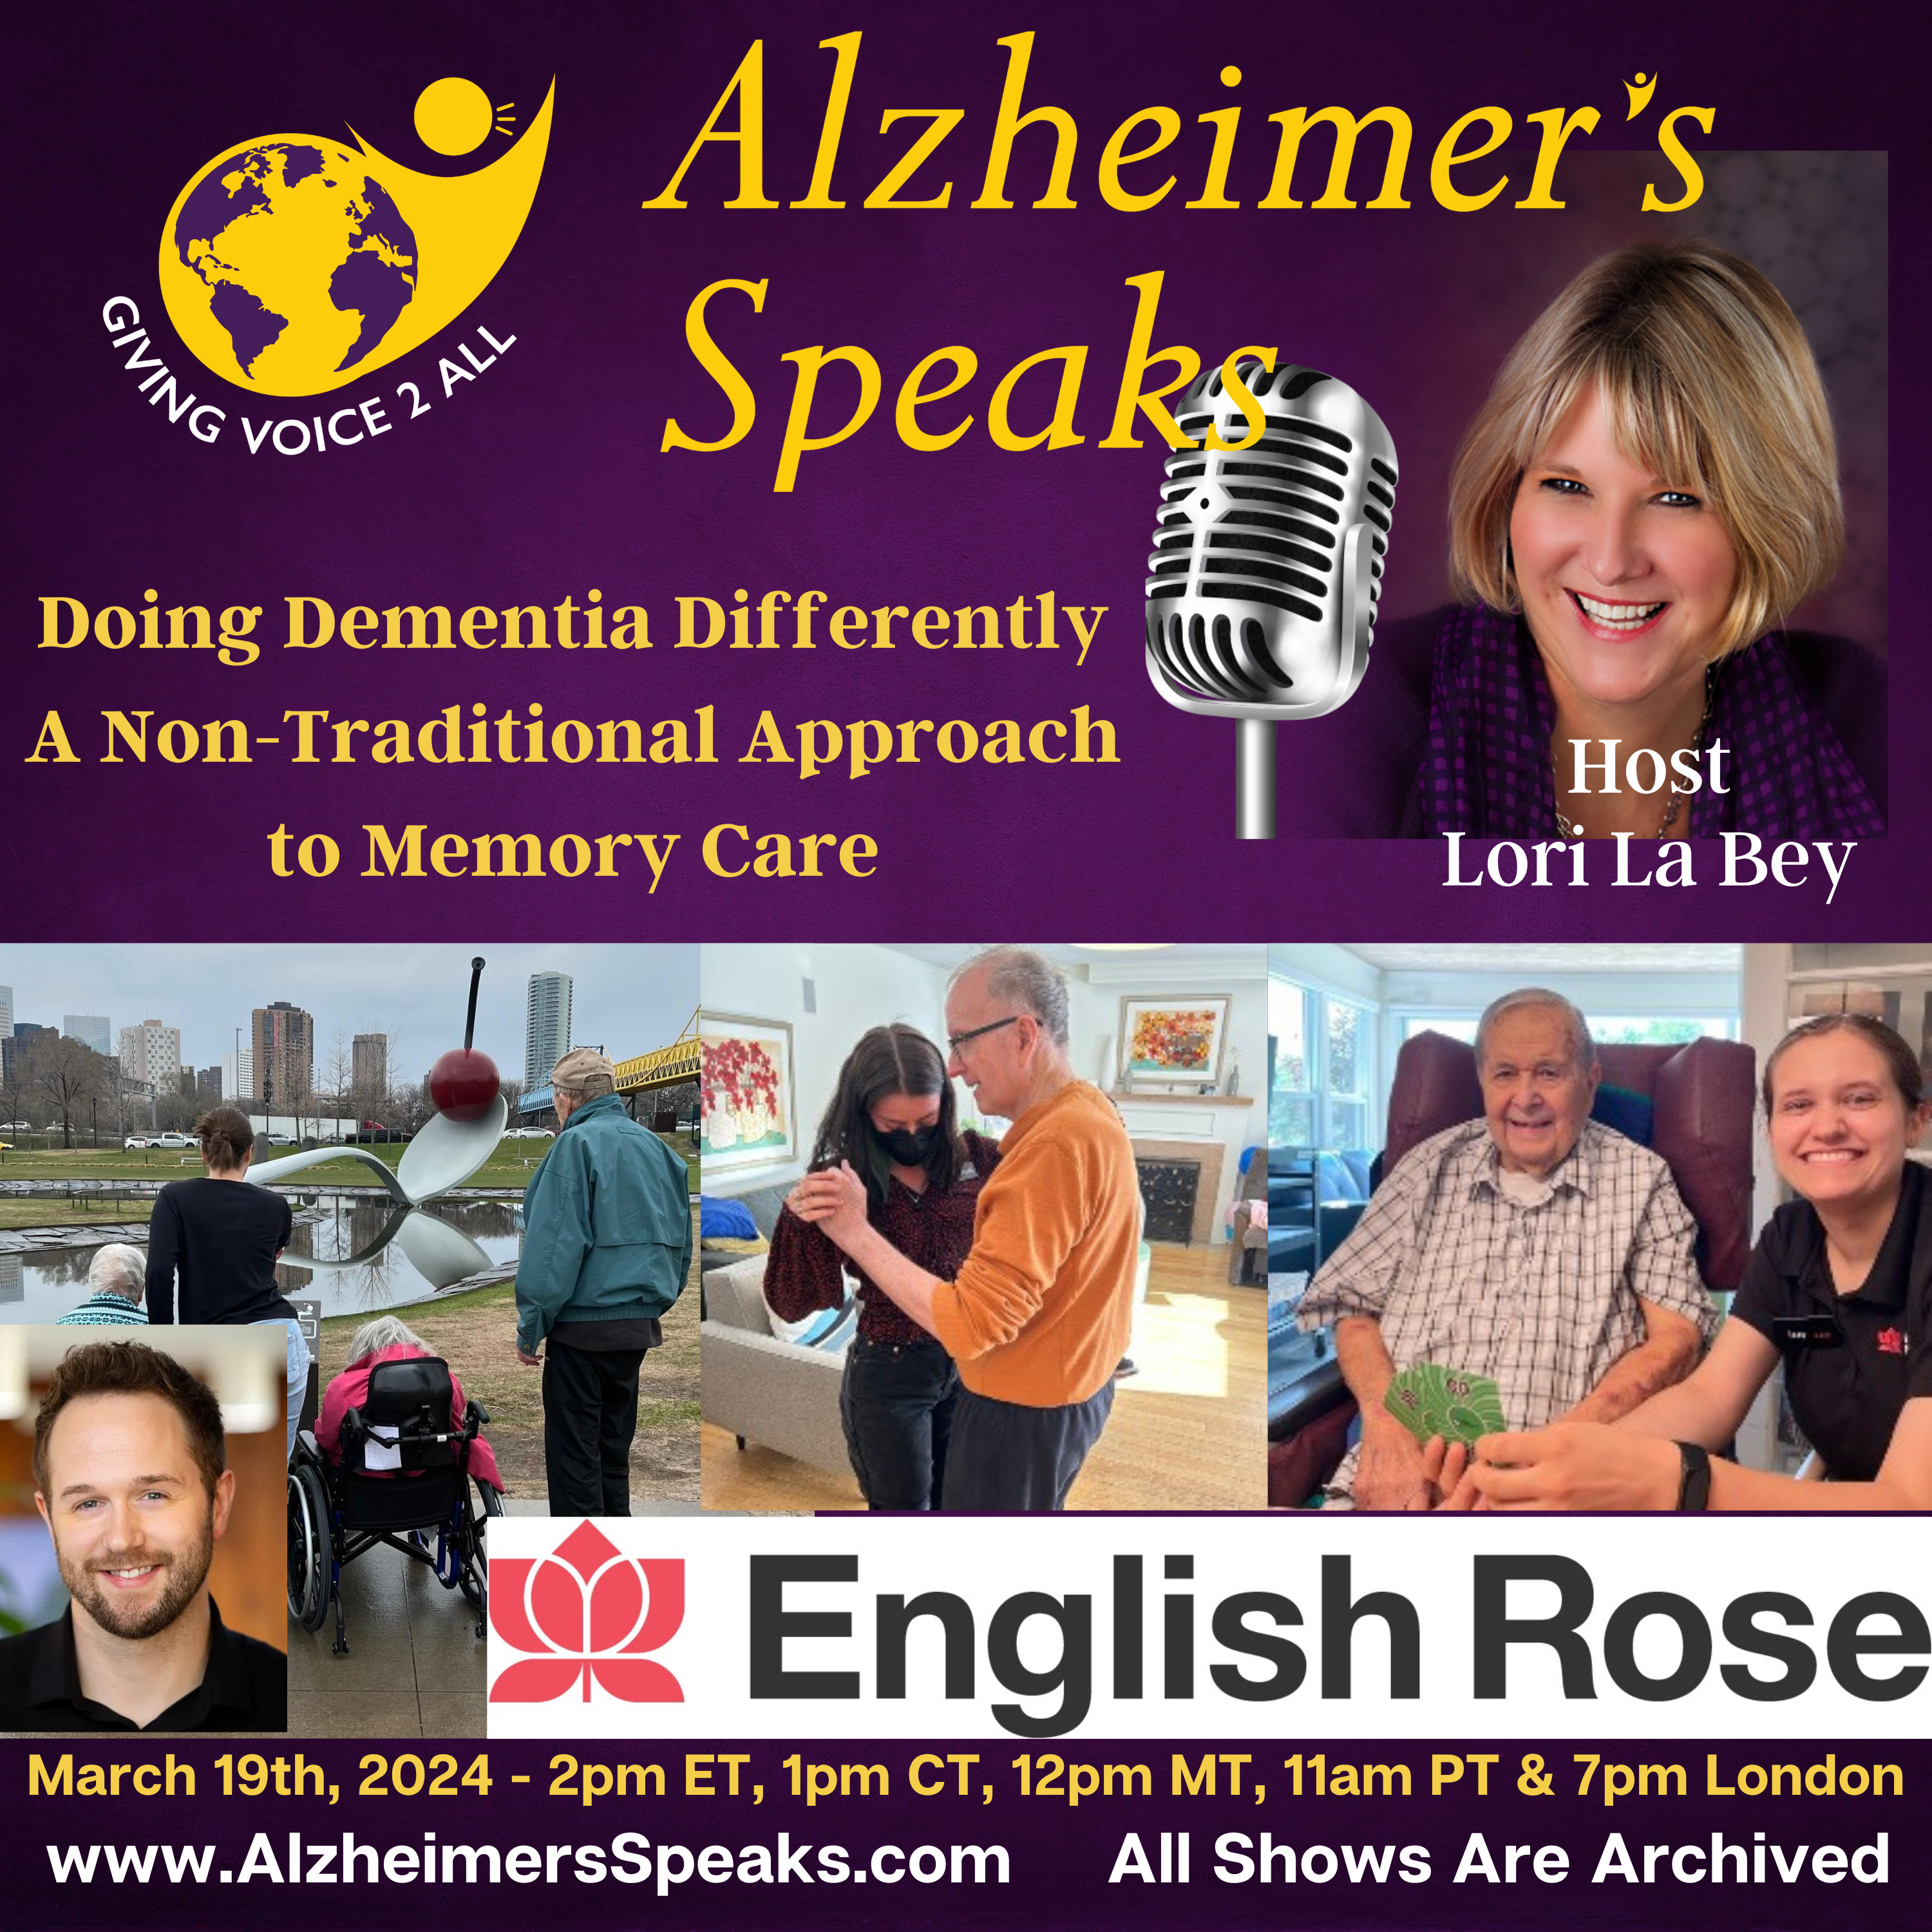 Doing Dementia Differently, A Non-Traditional Approach to Memory Care